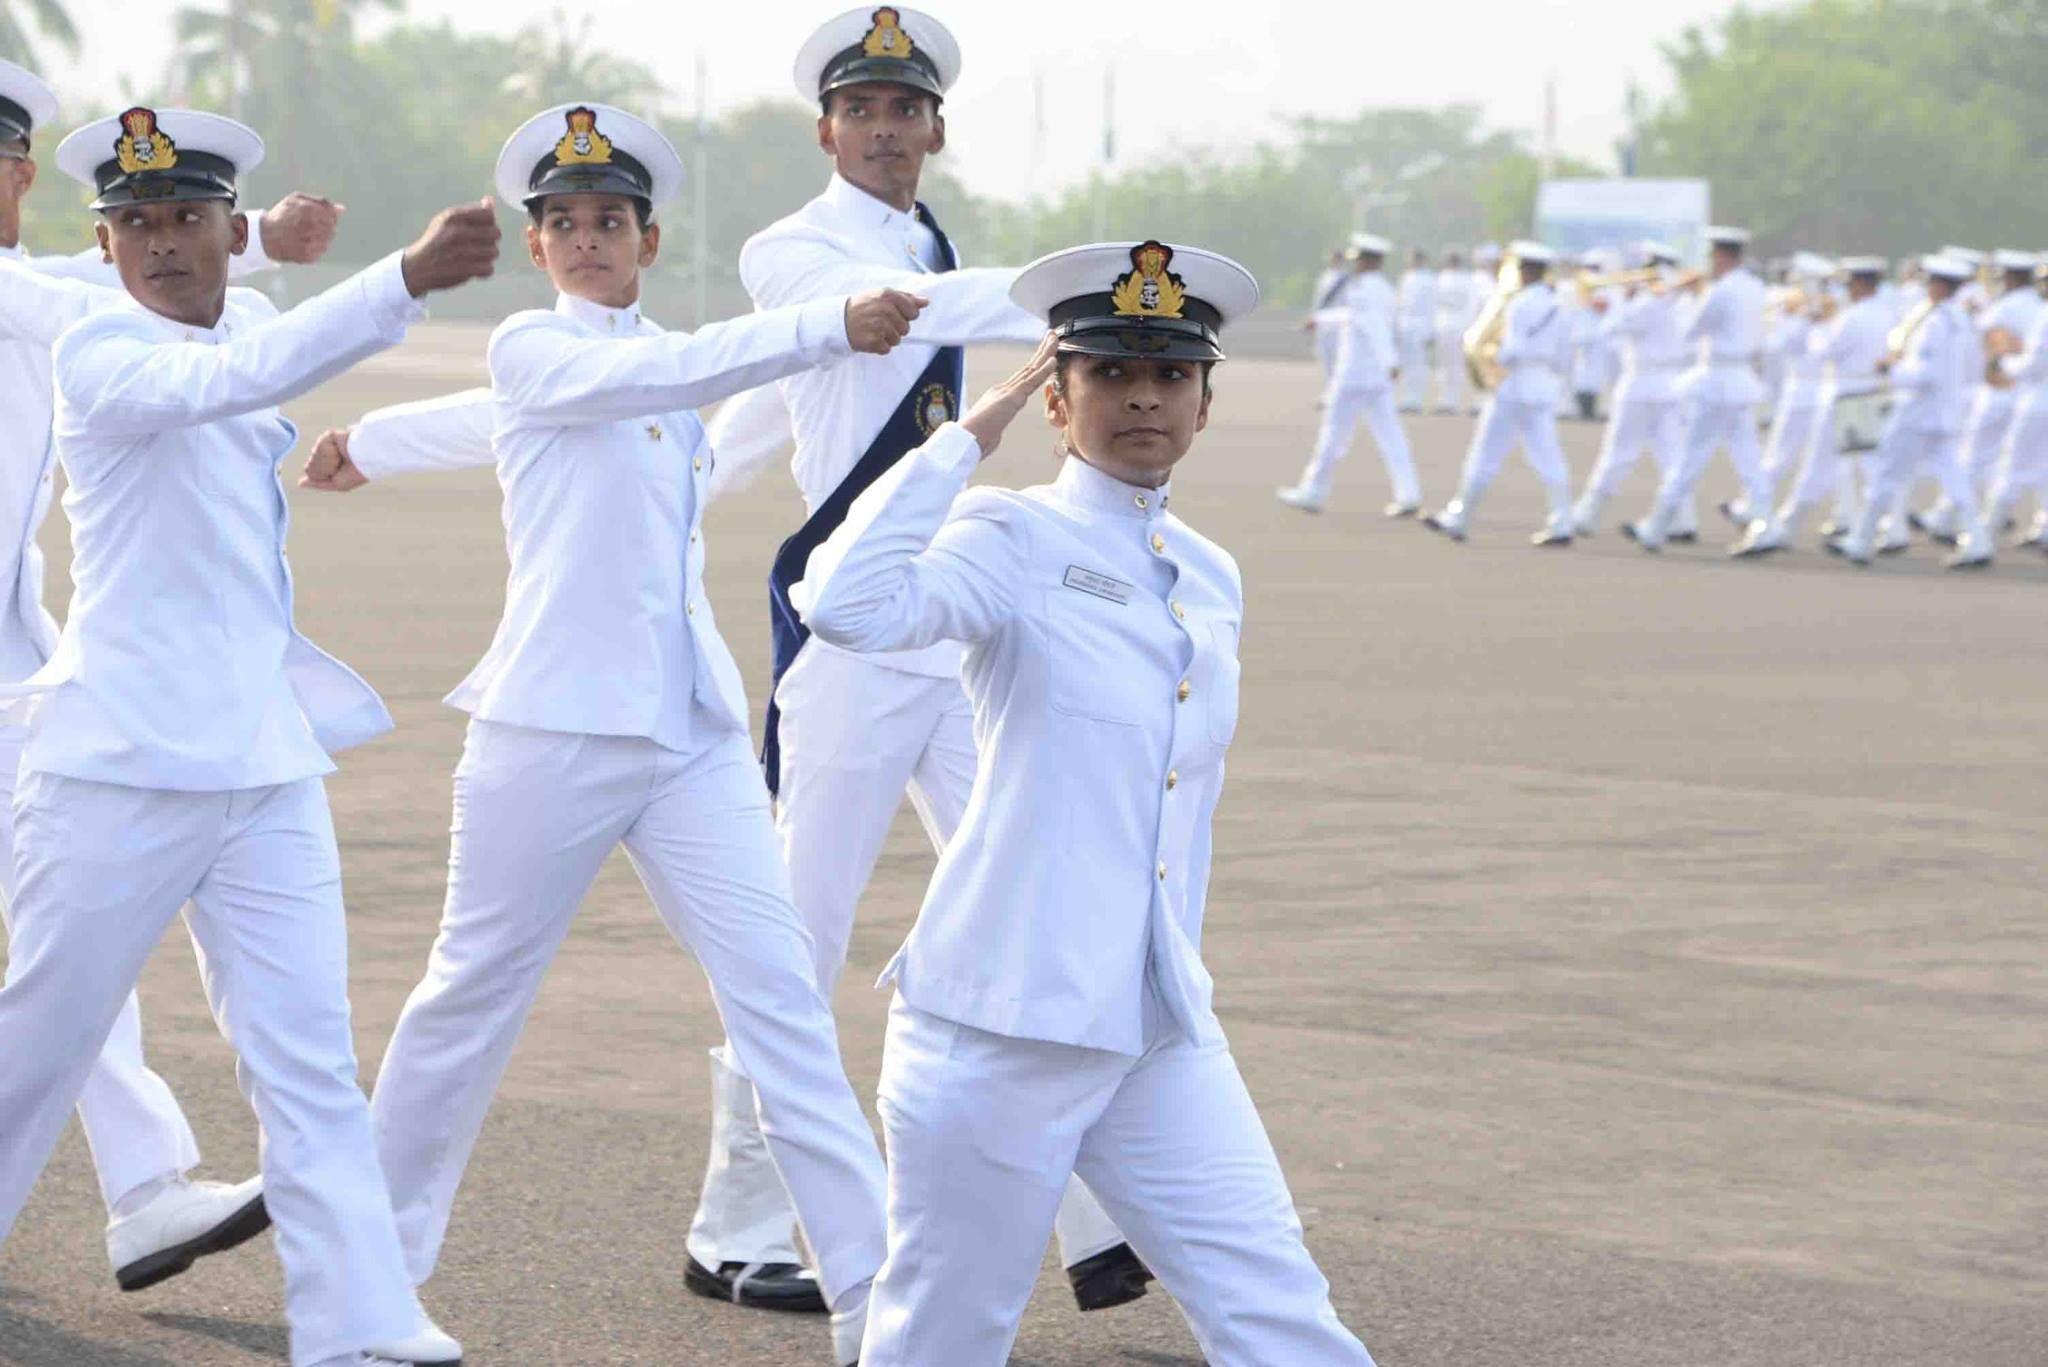 Indian Naval Academy Passing Out Parade 26 Nov 2016. Indian navy